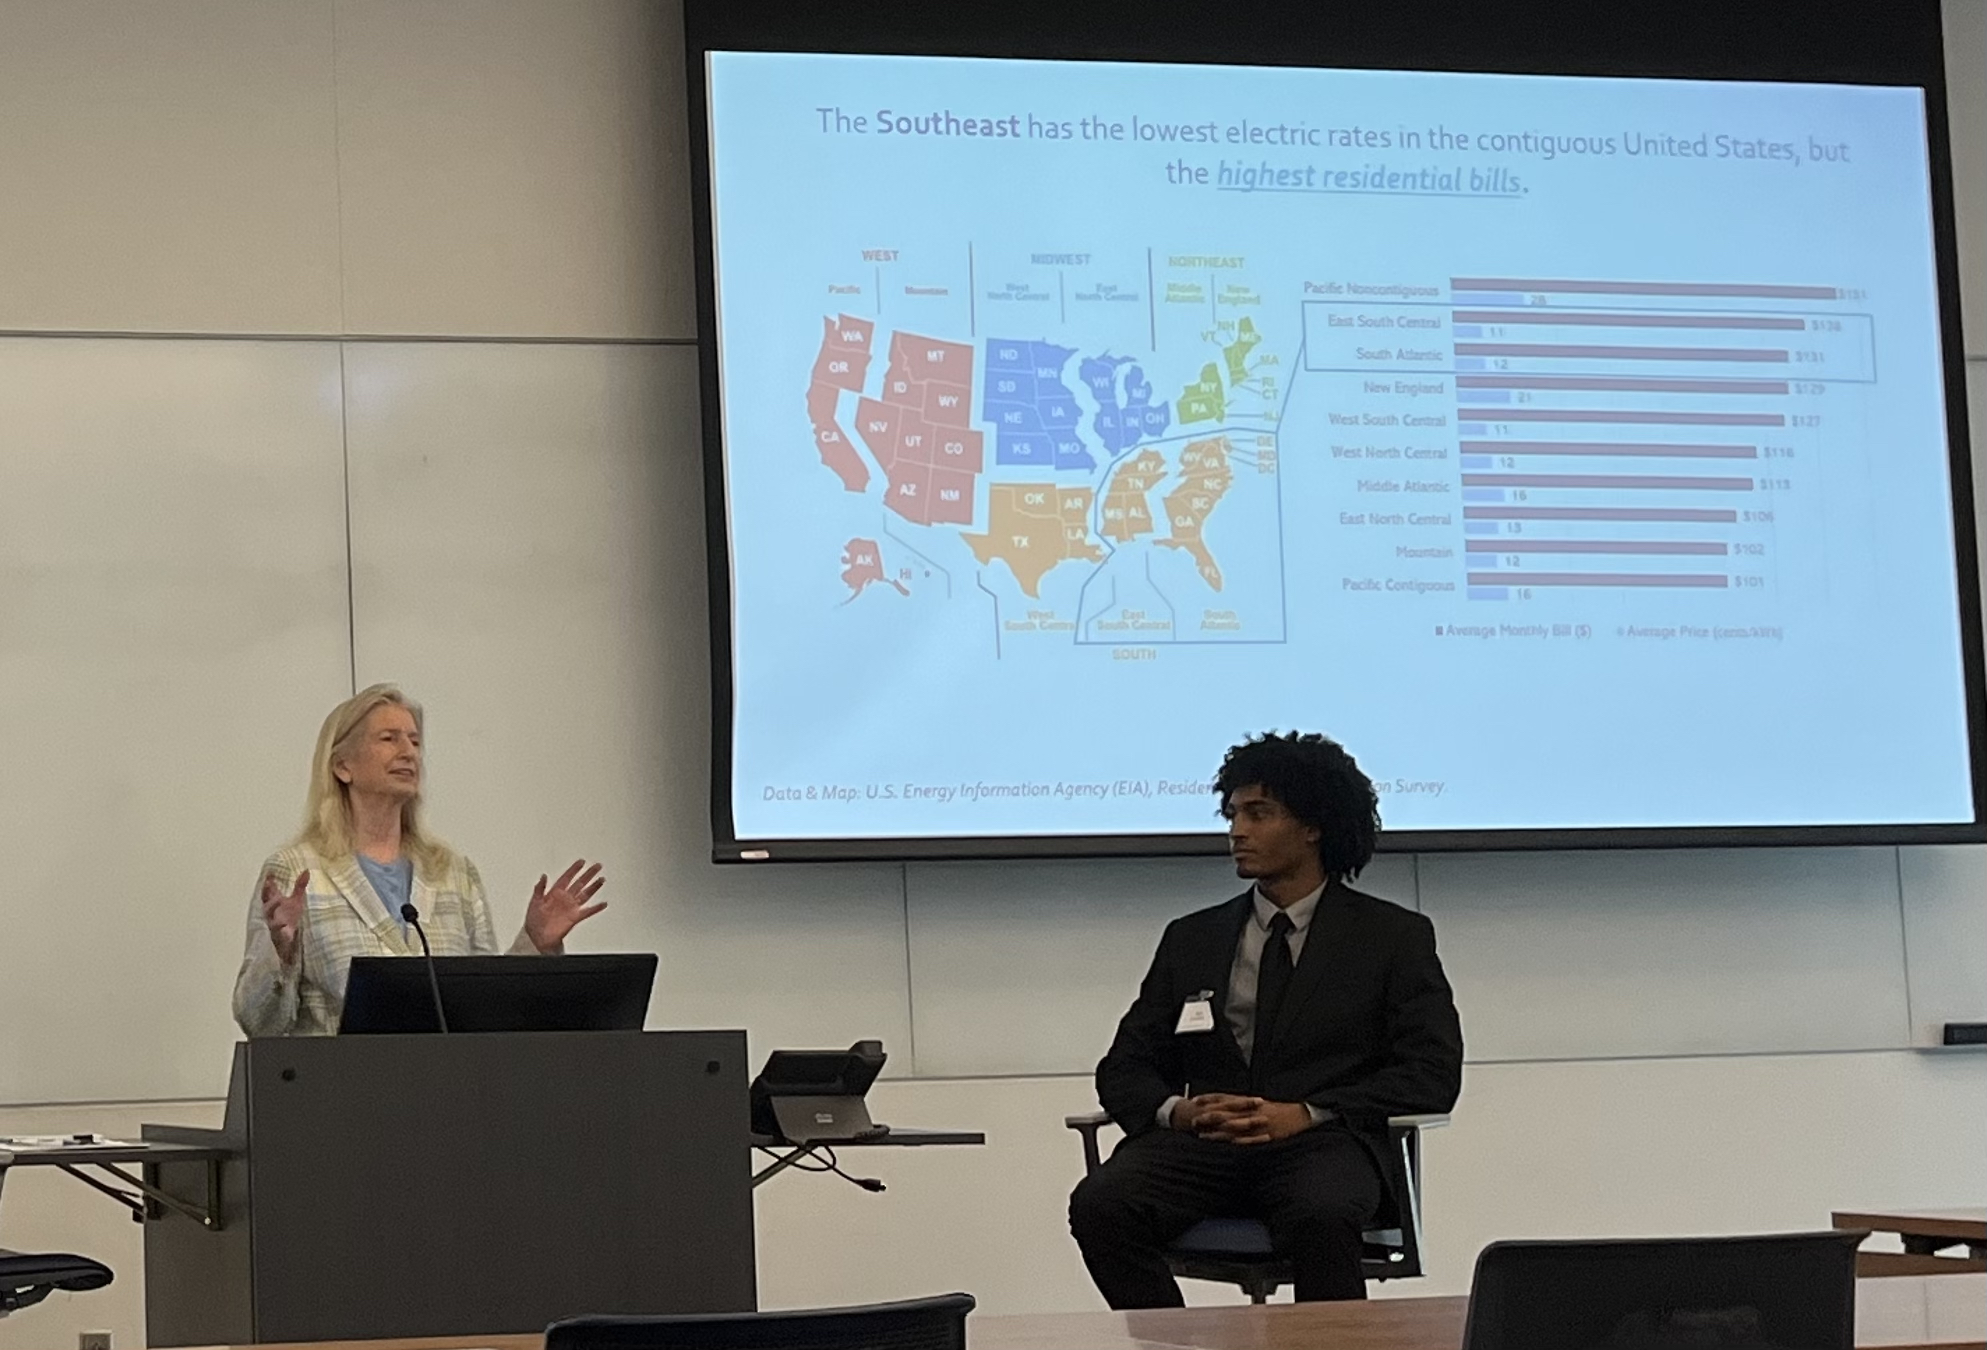 Dr. Marilyn Brown presenting on Energy burden in the southeast. Beside her sits Mark Lannaman, who acted as a moderator for the Energy Burden Role Play Simulation